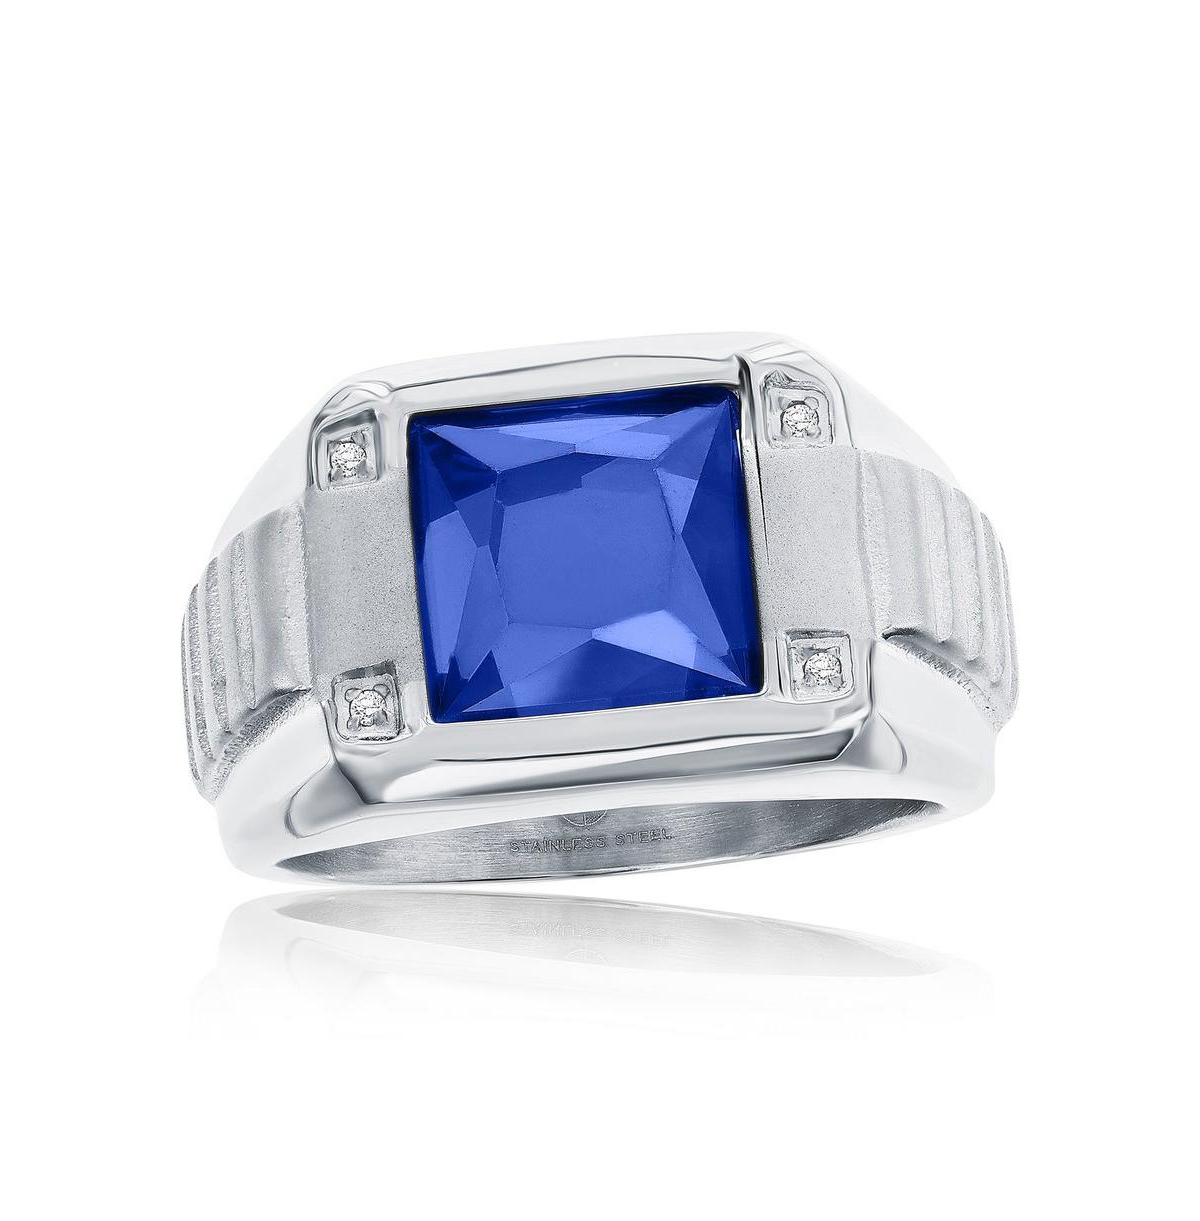 Stainless Steel Genuine Spinel Square Cz Ring - Blue